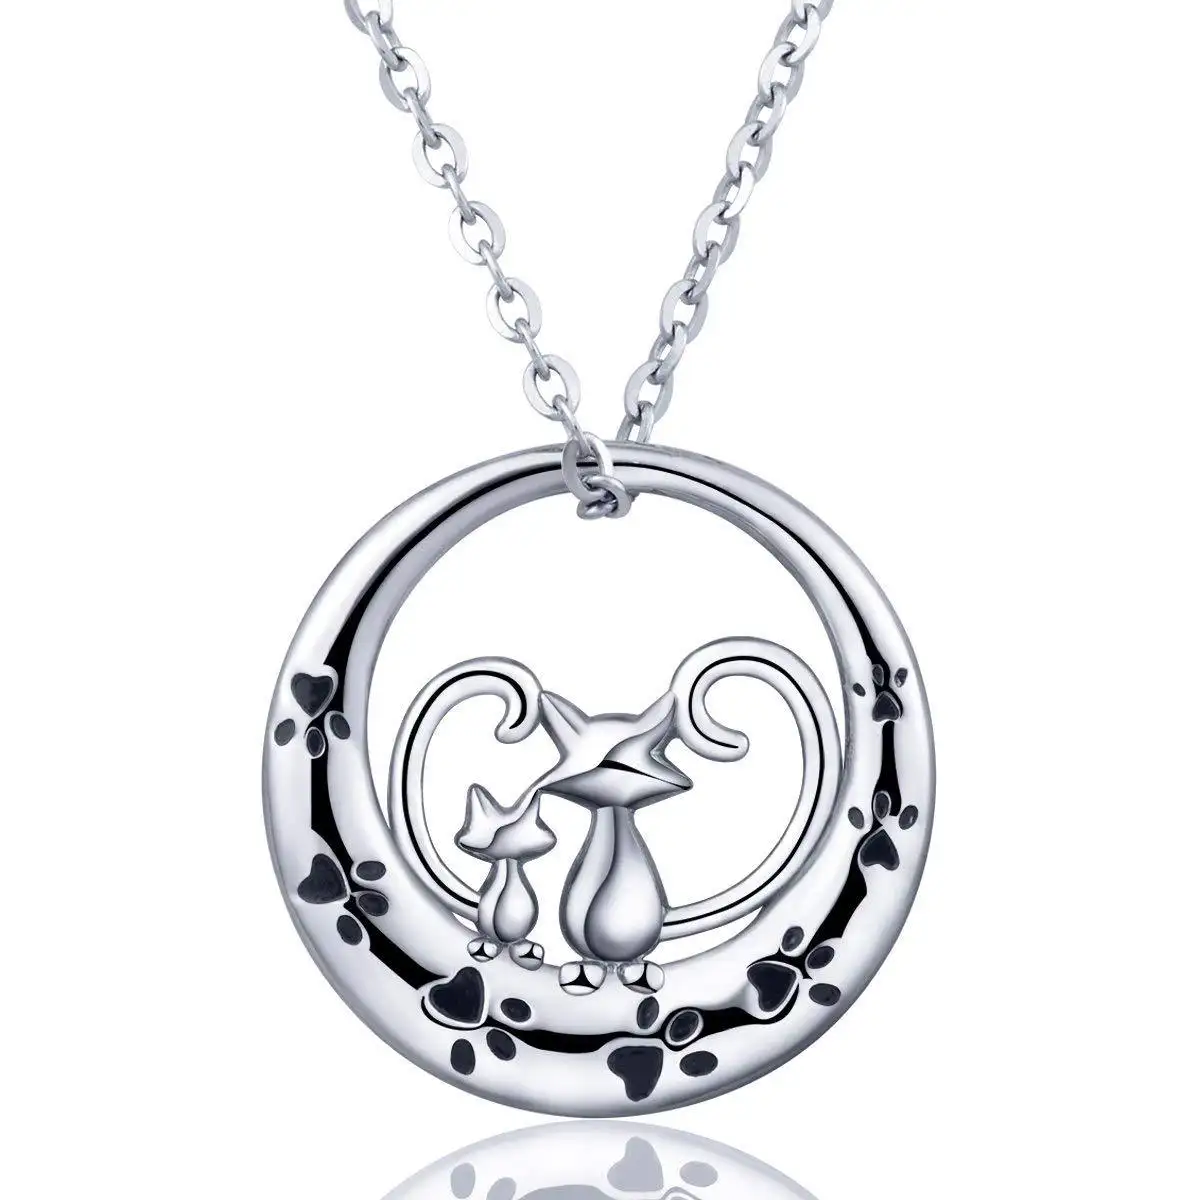 Cute cat mother's day jewelry gift sterling silver 925 chain necklace jewelry silver 925 sterling pendant